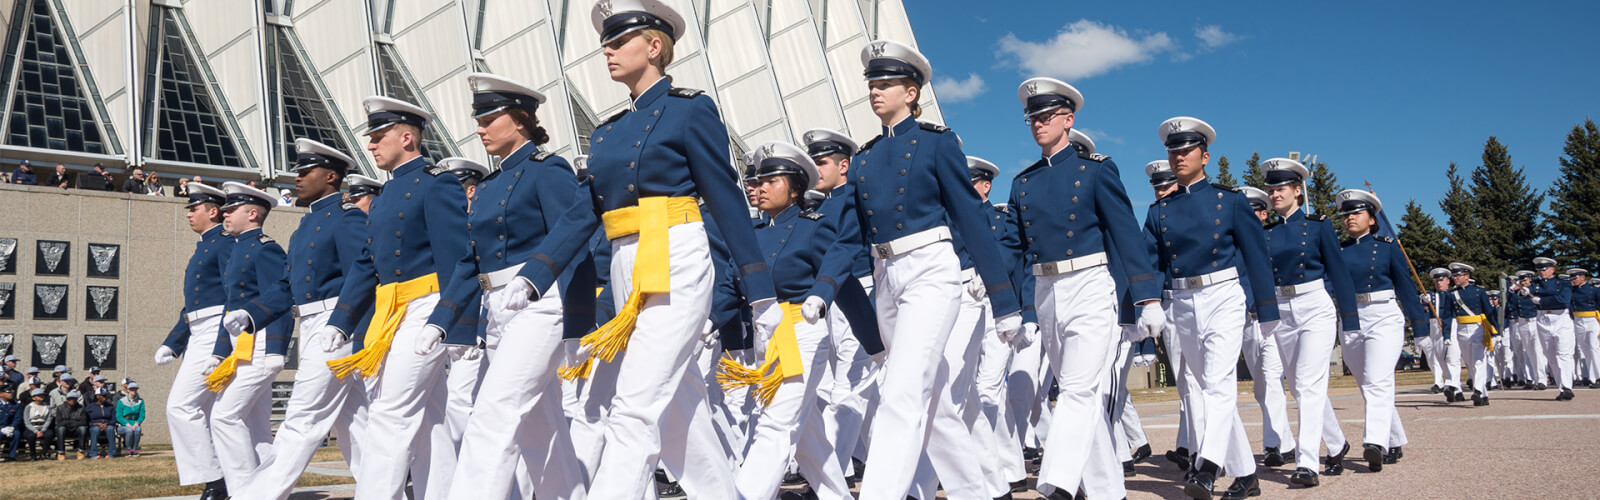 About - United States Air Force Academy